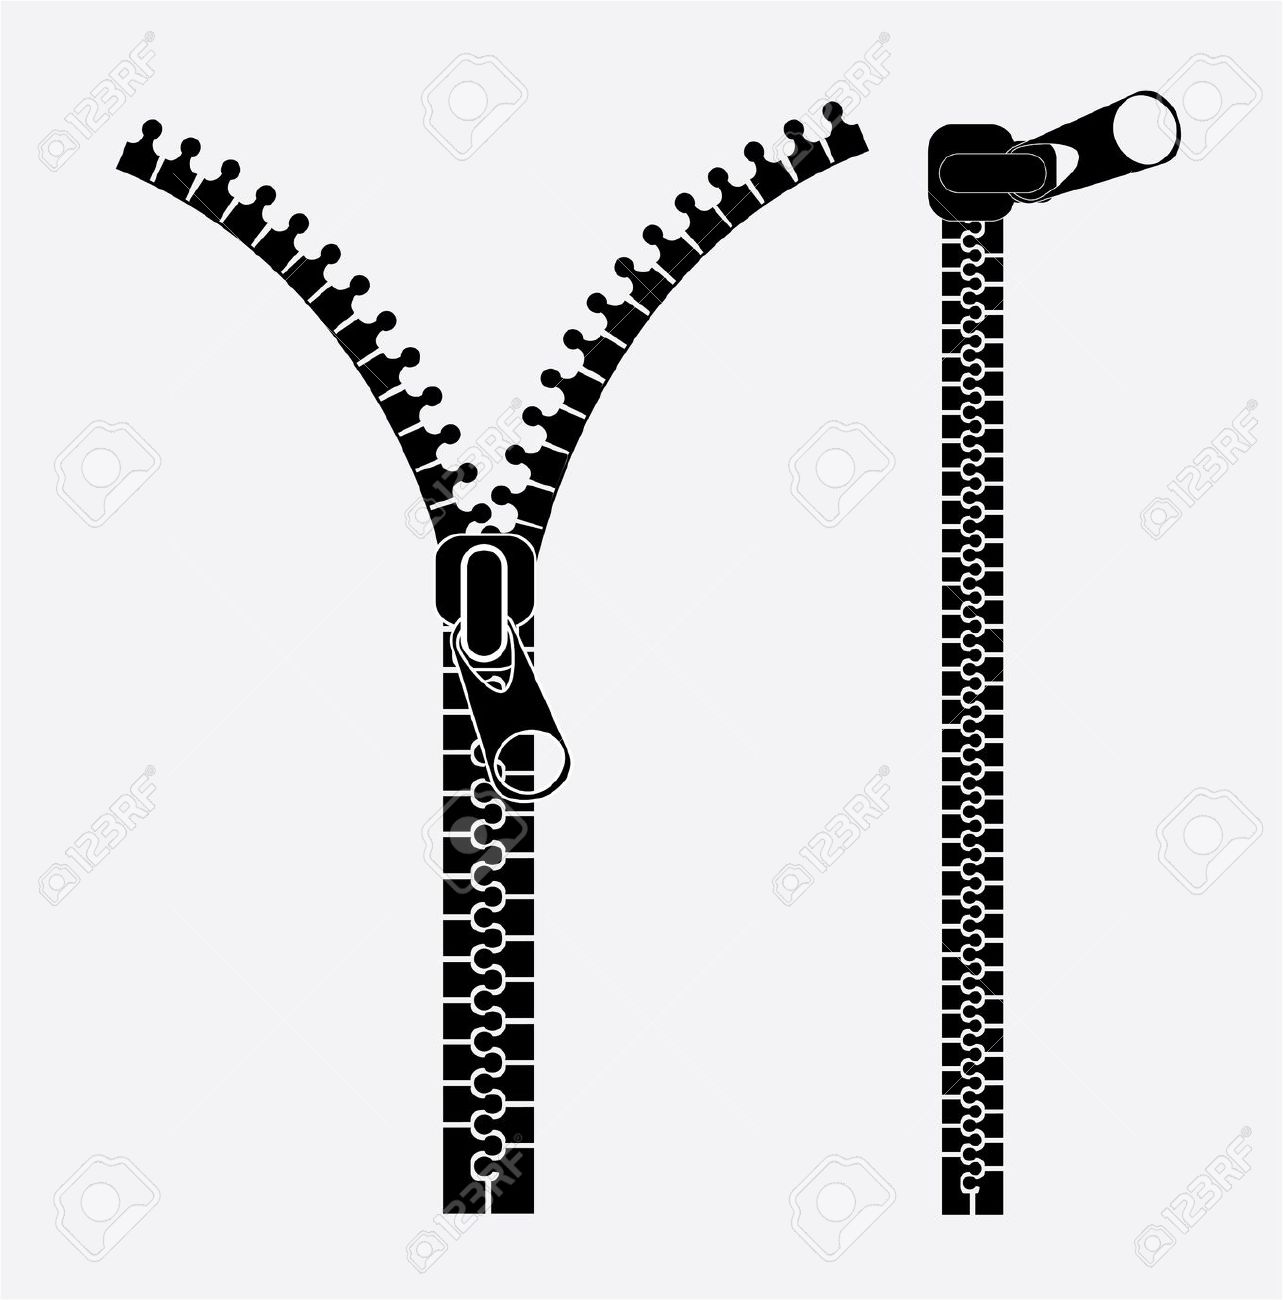 clipart picture of zipper - photo #24